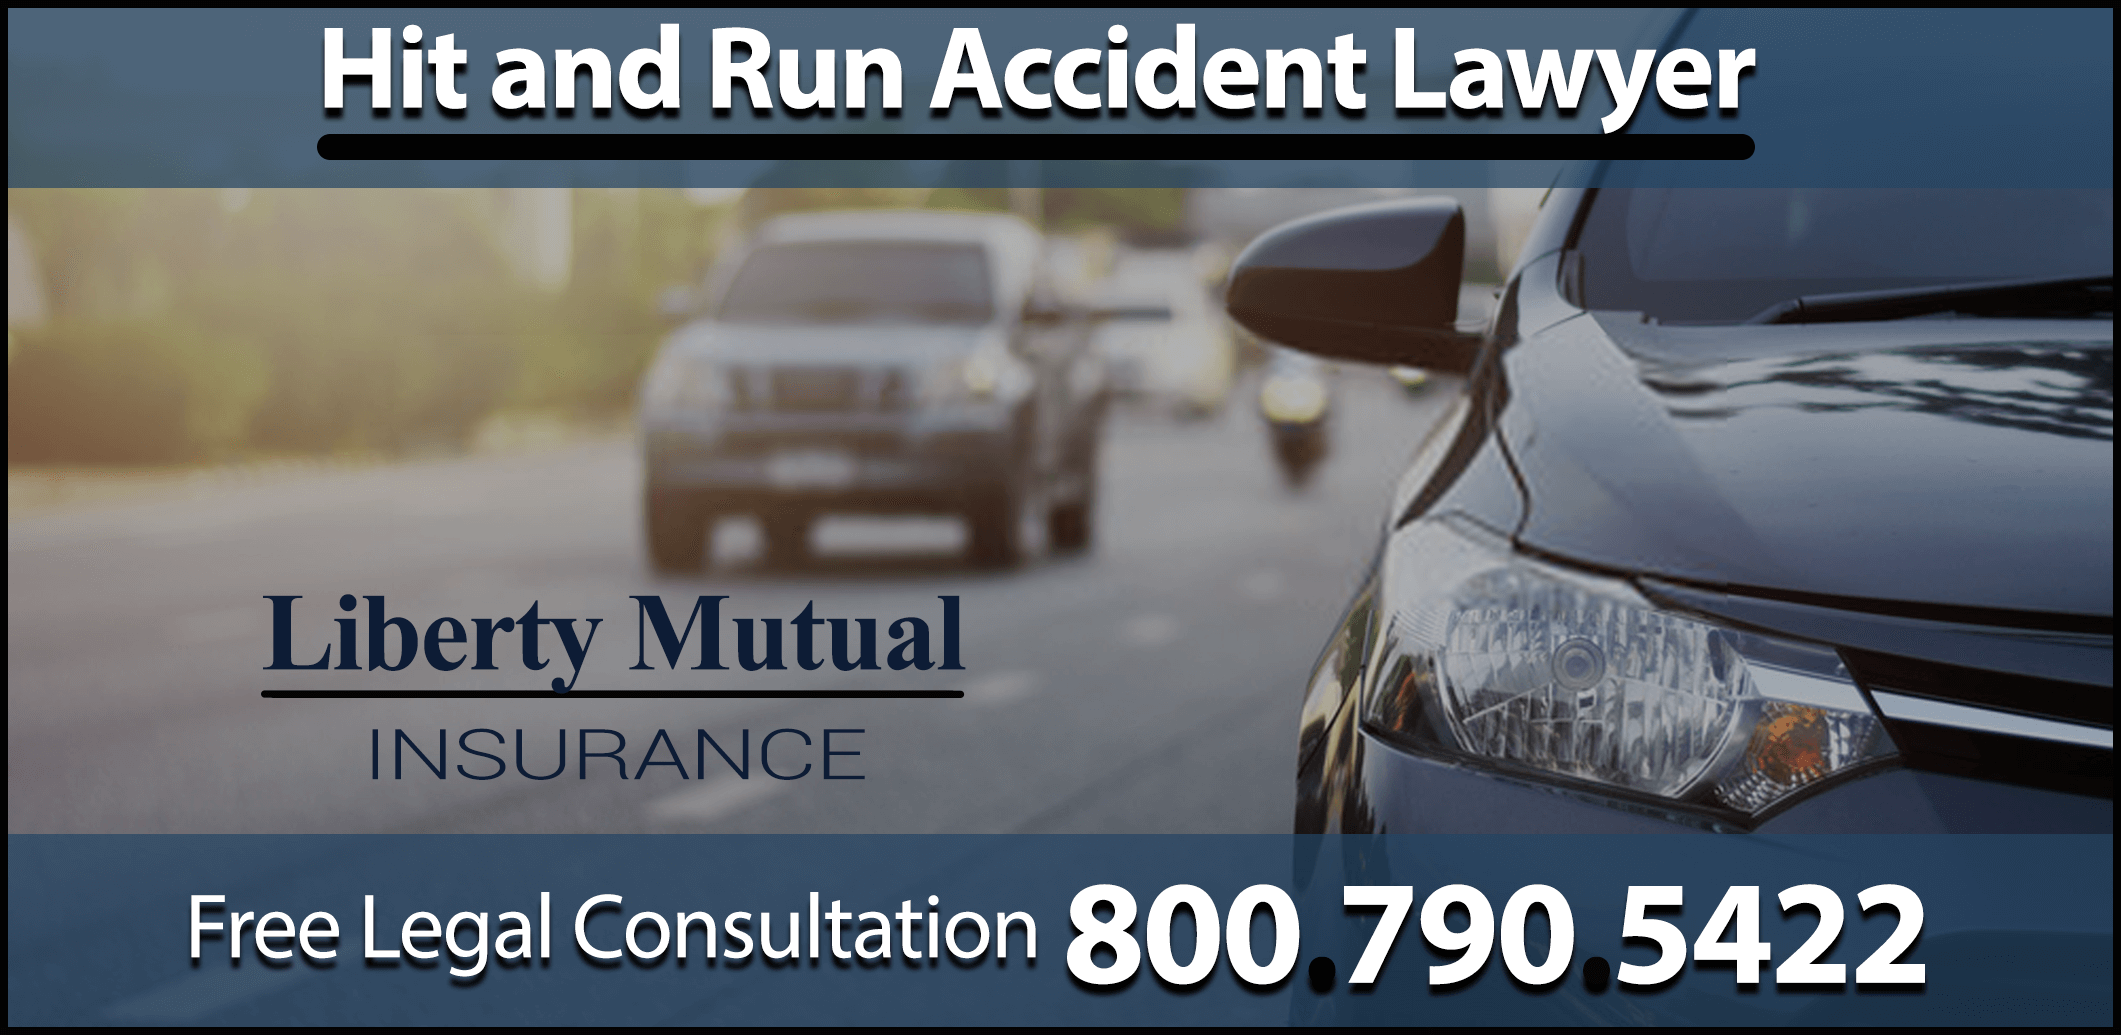 liberty mutual insurance hit and run accident lawyer injury medical bills consultation compensation sue